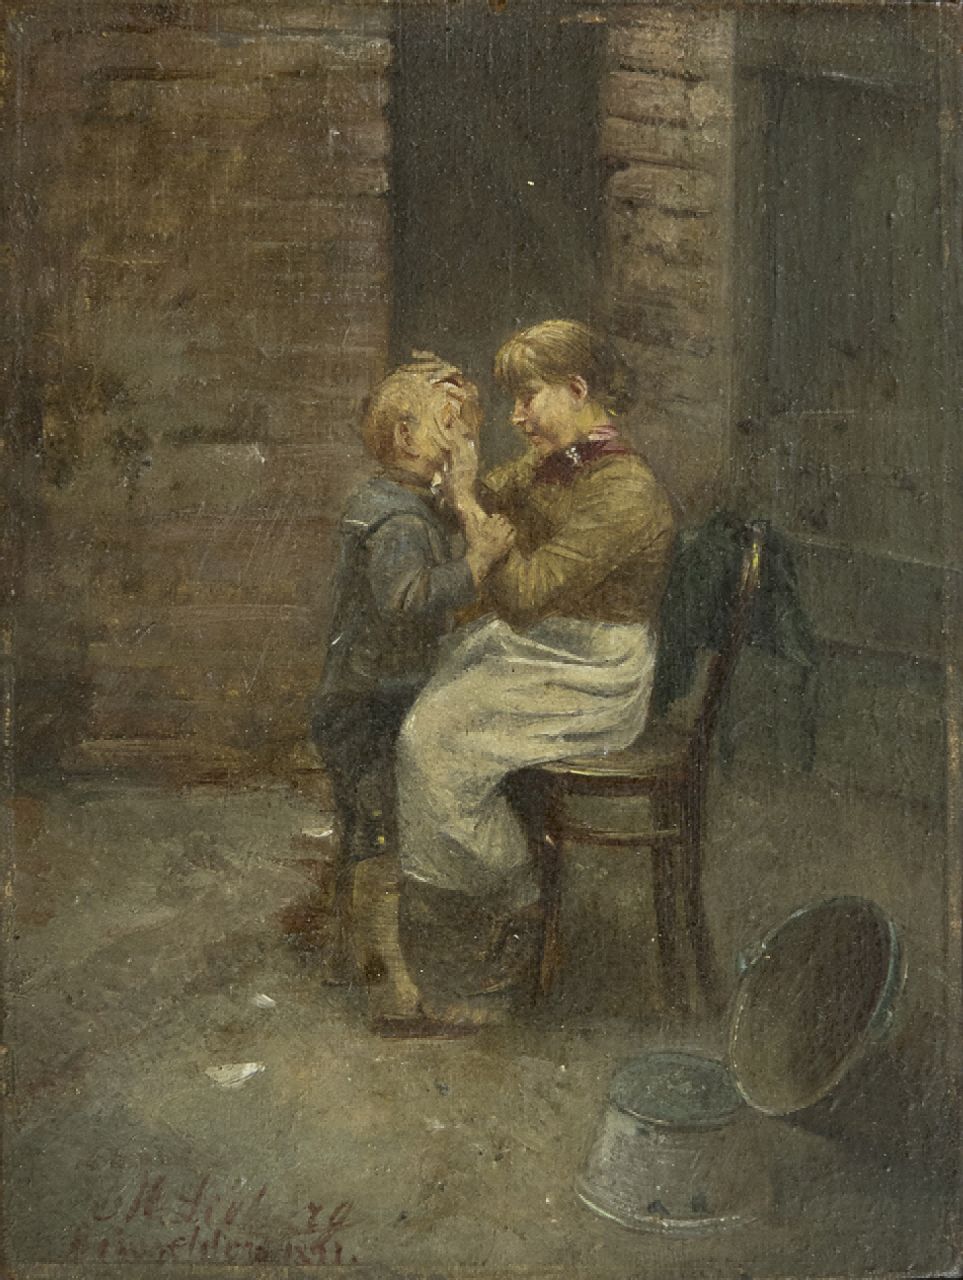 Lieberg M.  | Max Lieberg, Mother's care, oil on panel 12.0 x 9.0 cm, signed l.l. and 'Düsseldorf' 1891